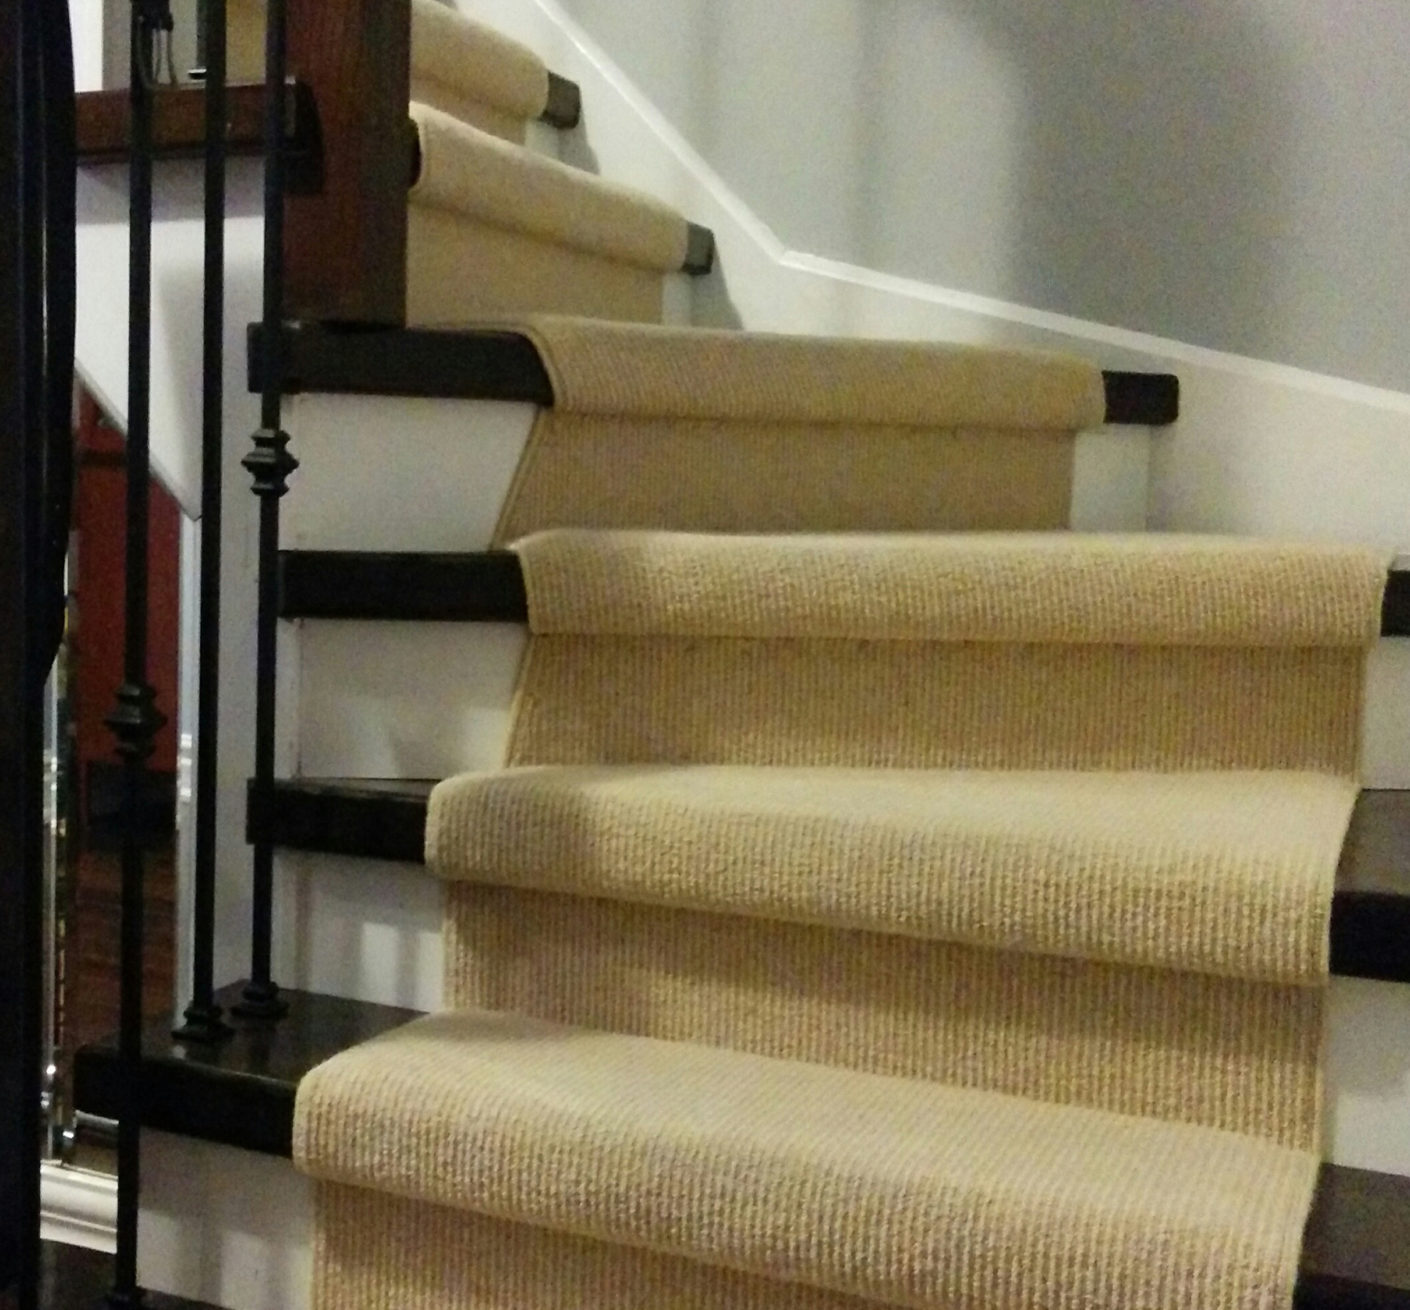 Wool Carpet Runner for Stairs and Hallway installed in Mississauga, Ontario